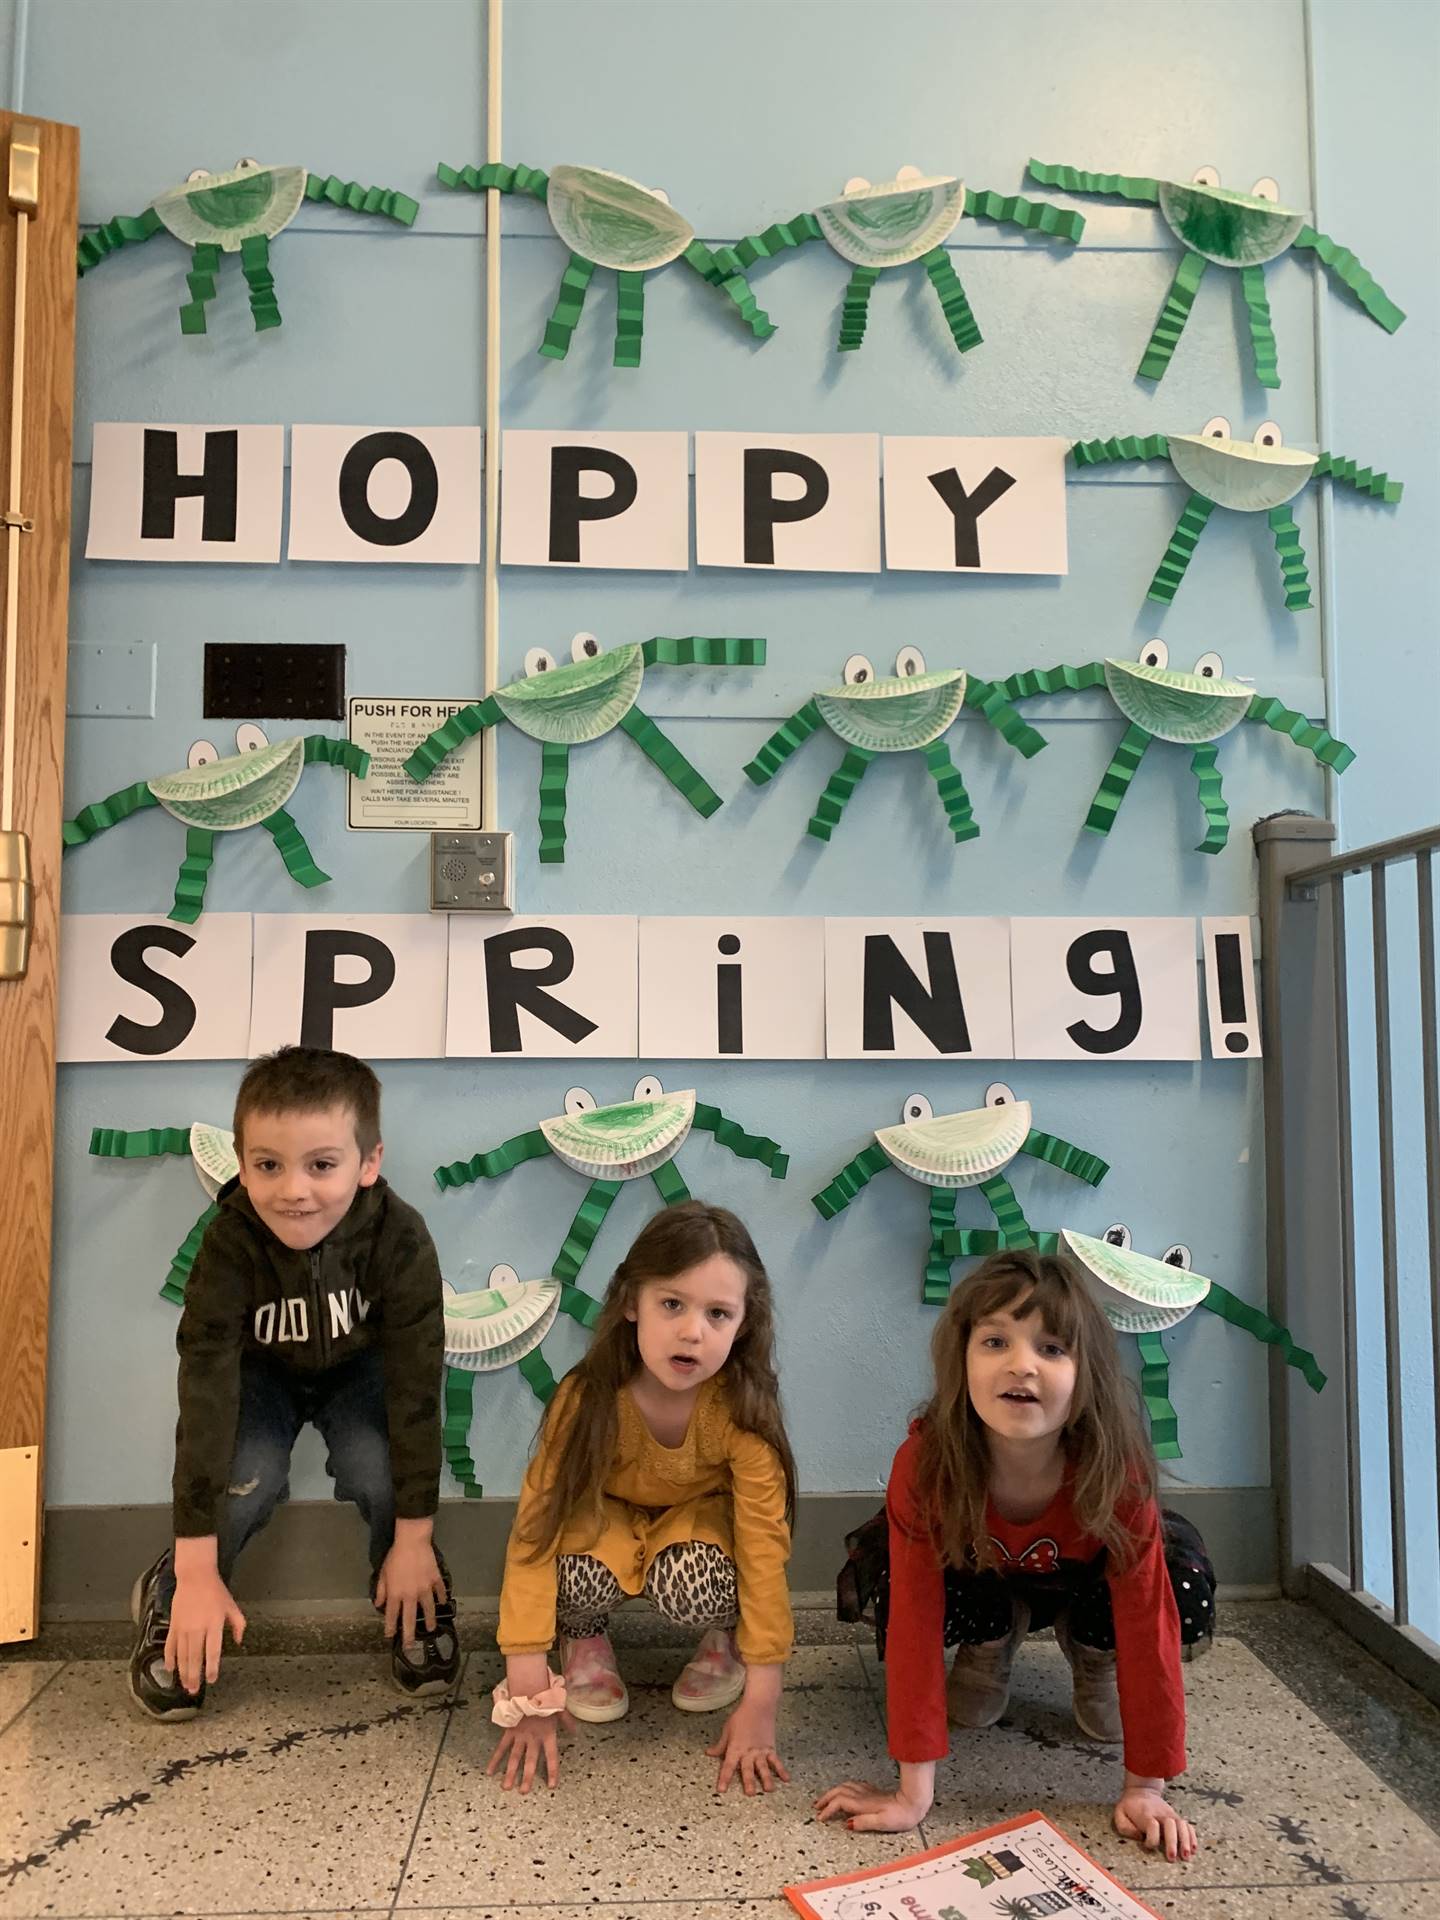 3 students hopping like frogs. background is sign "hoppy spring" with paper craft frogs.